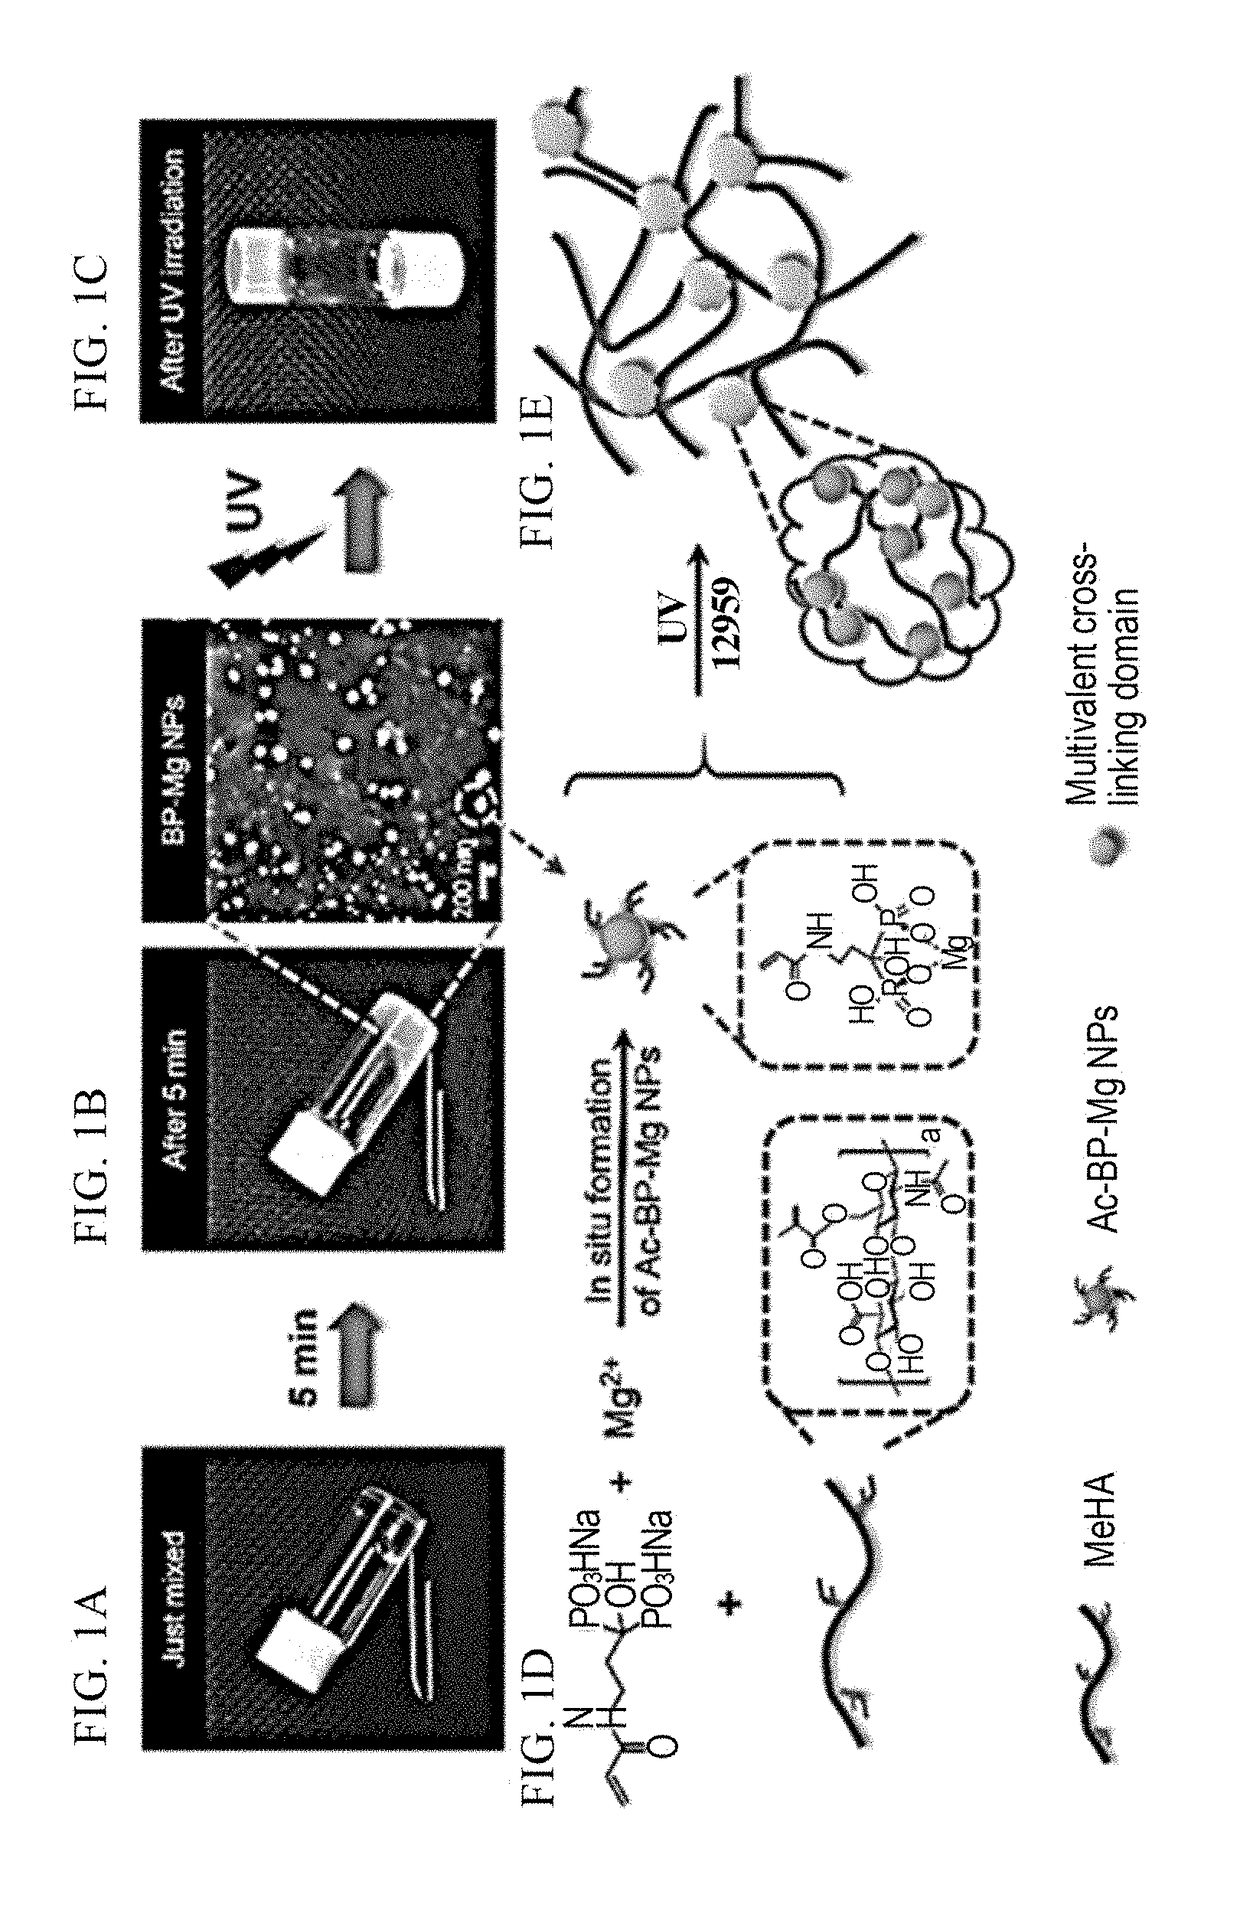 Injectable hydrogels that promote mineralization and afford sustained release of bioactive ions